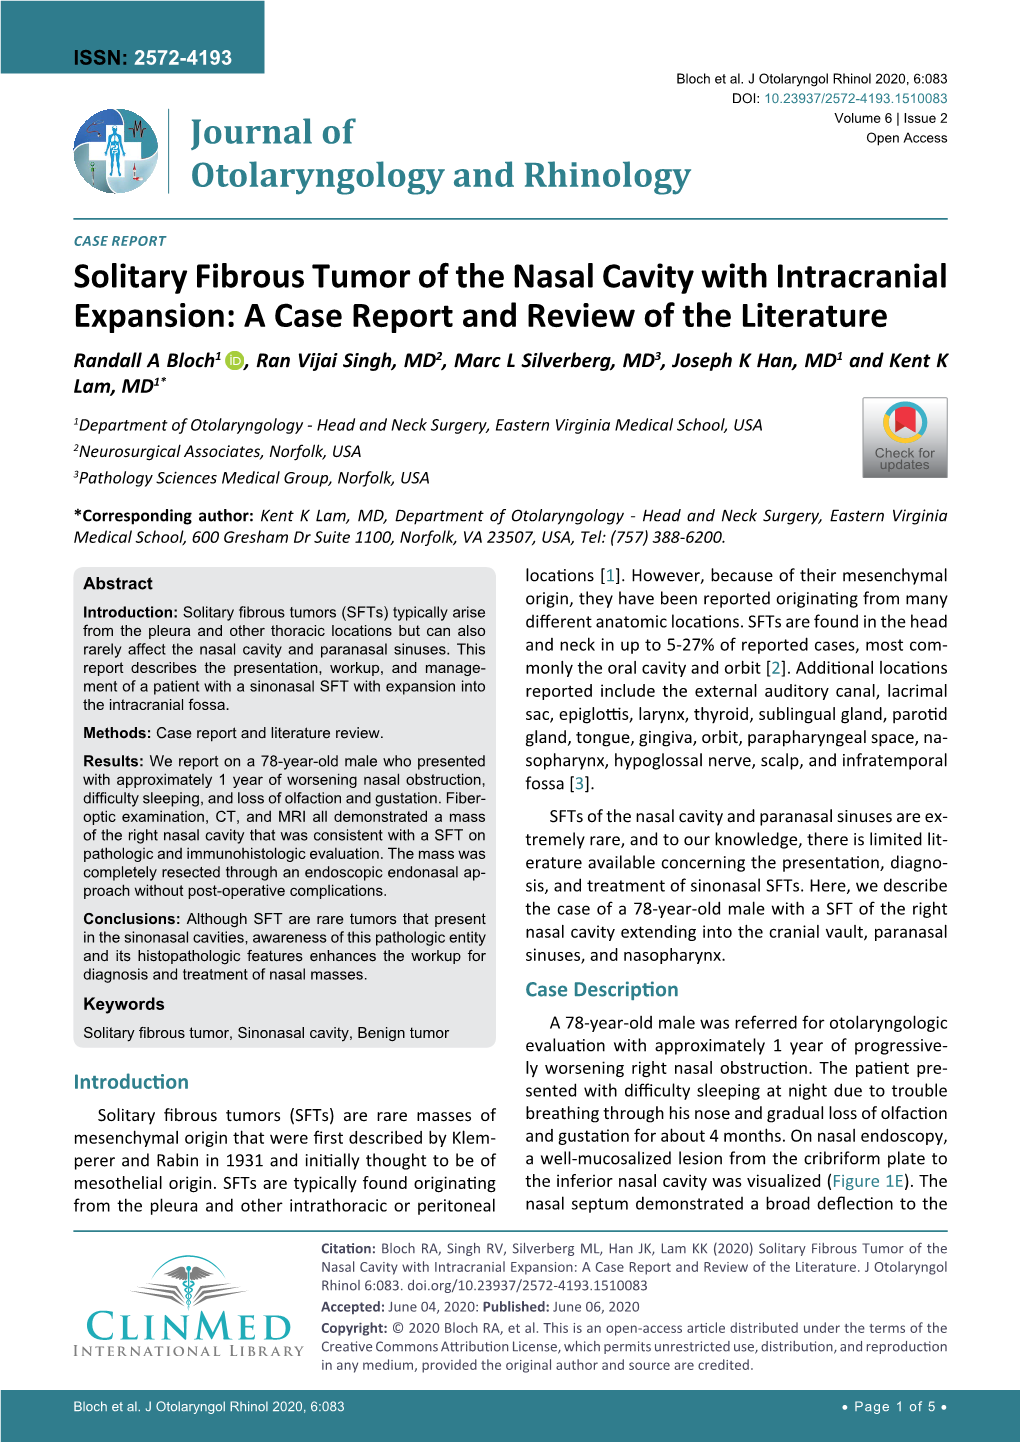 Solitary Fibrous Tumor of the Nasal Cavity with Intracranial Expansion